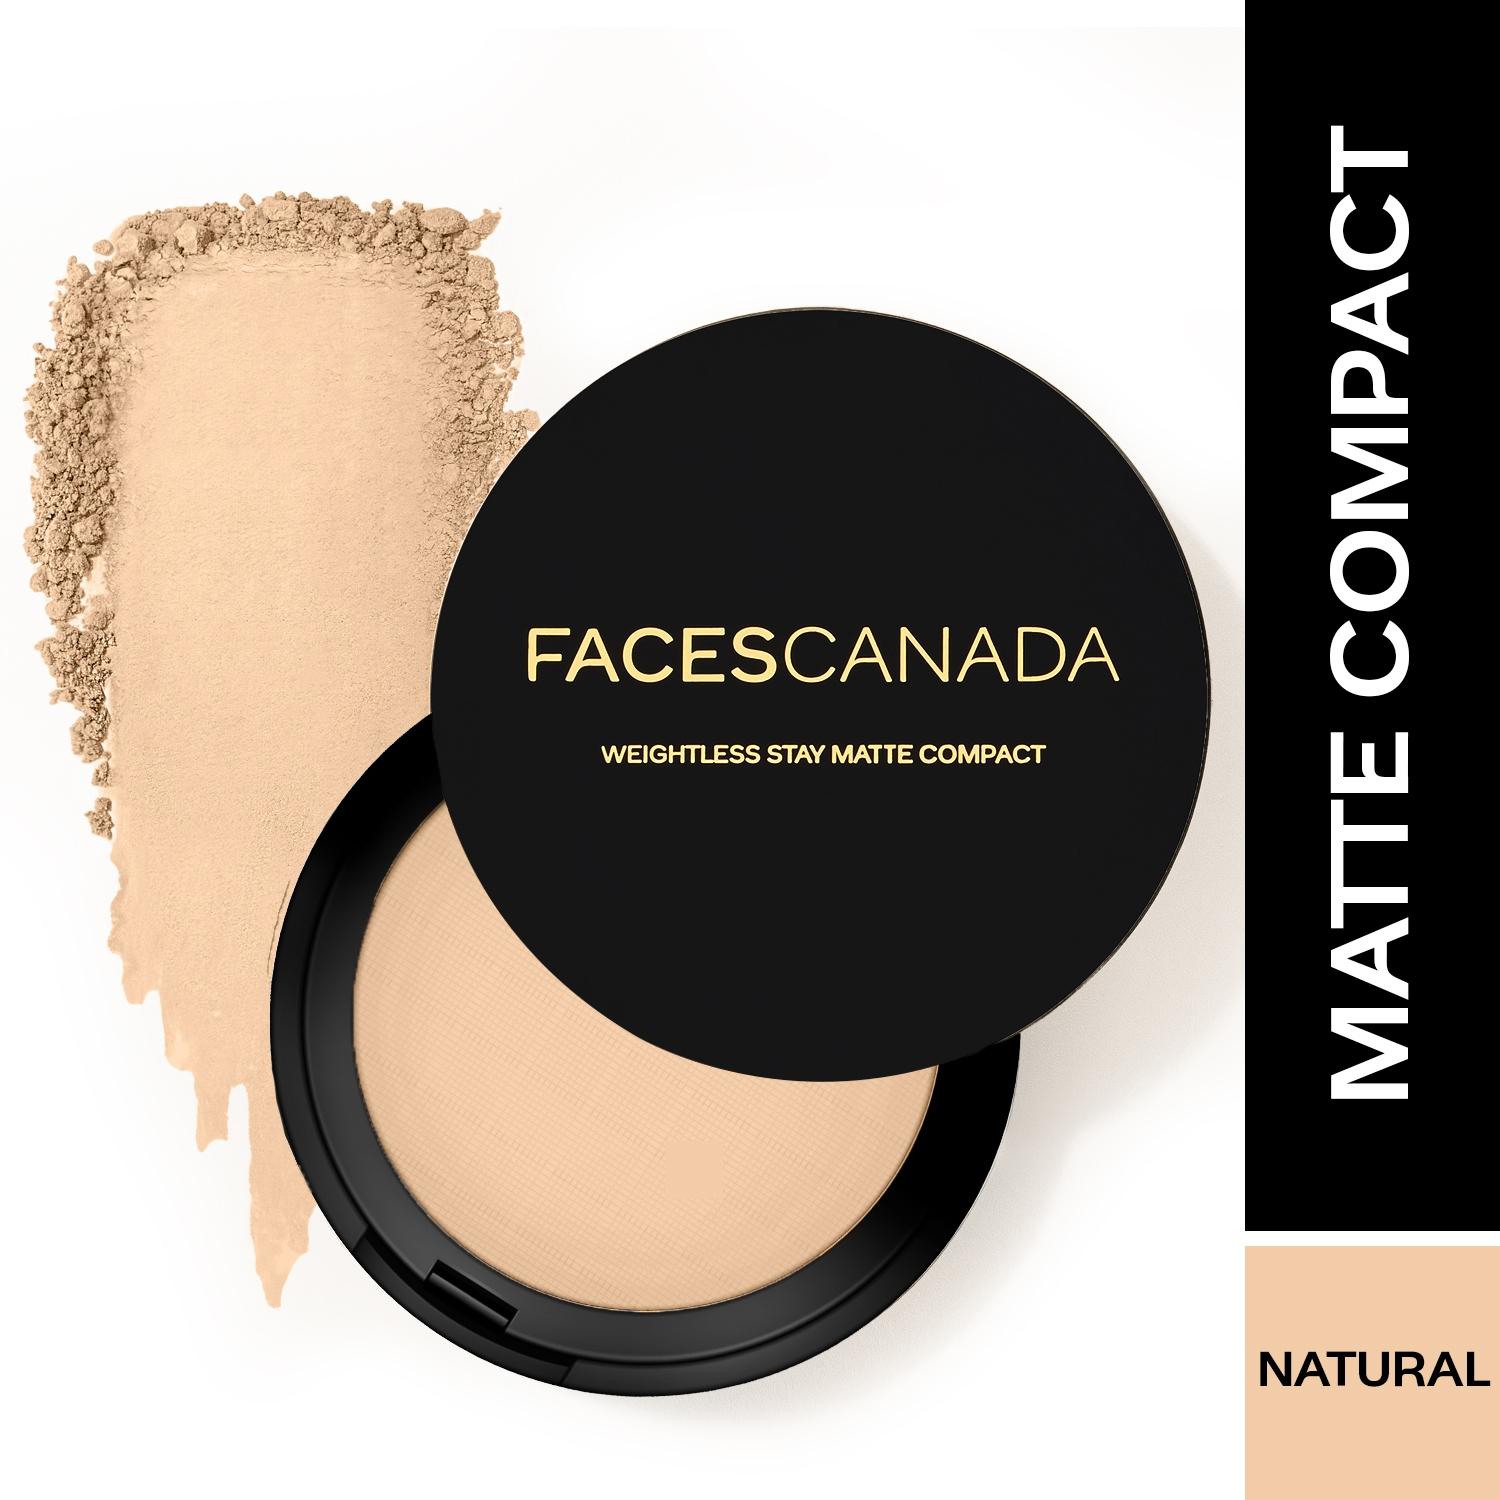 faces-canada-weightless-stay-matte-compact-spf-20---02-natural-(9g)